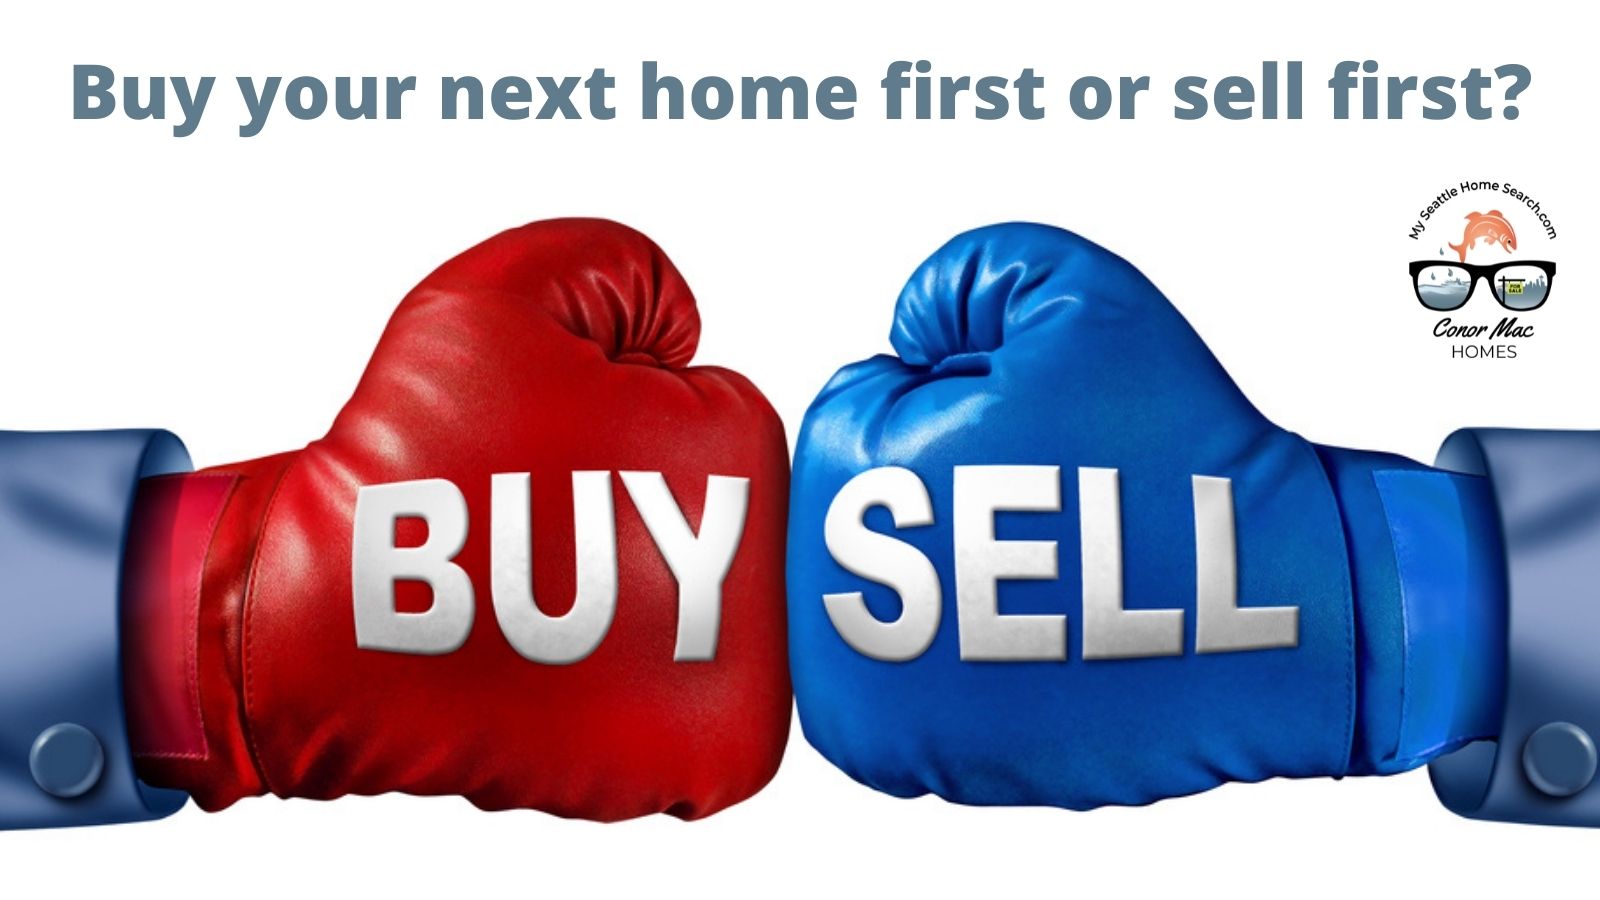 Advice on selling and buying your home at the same time